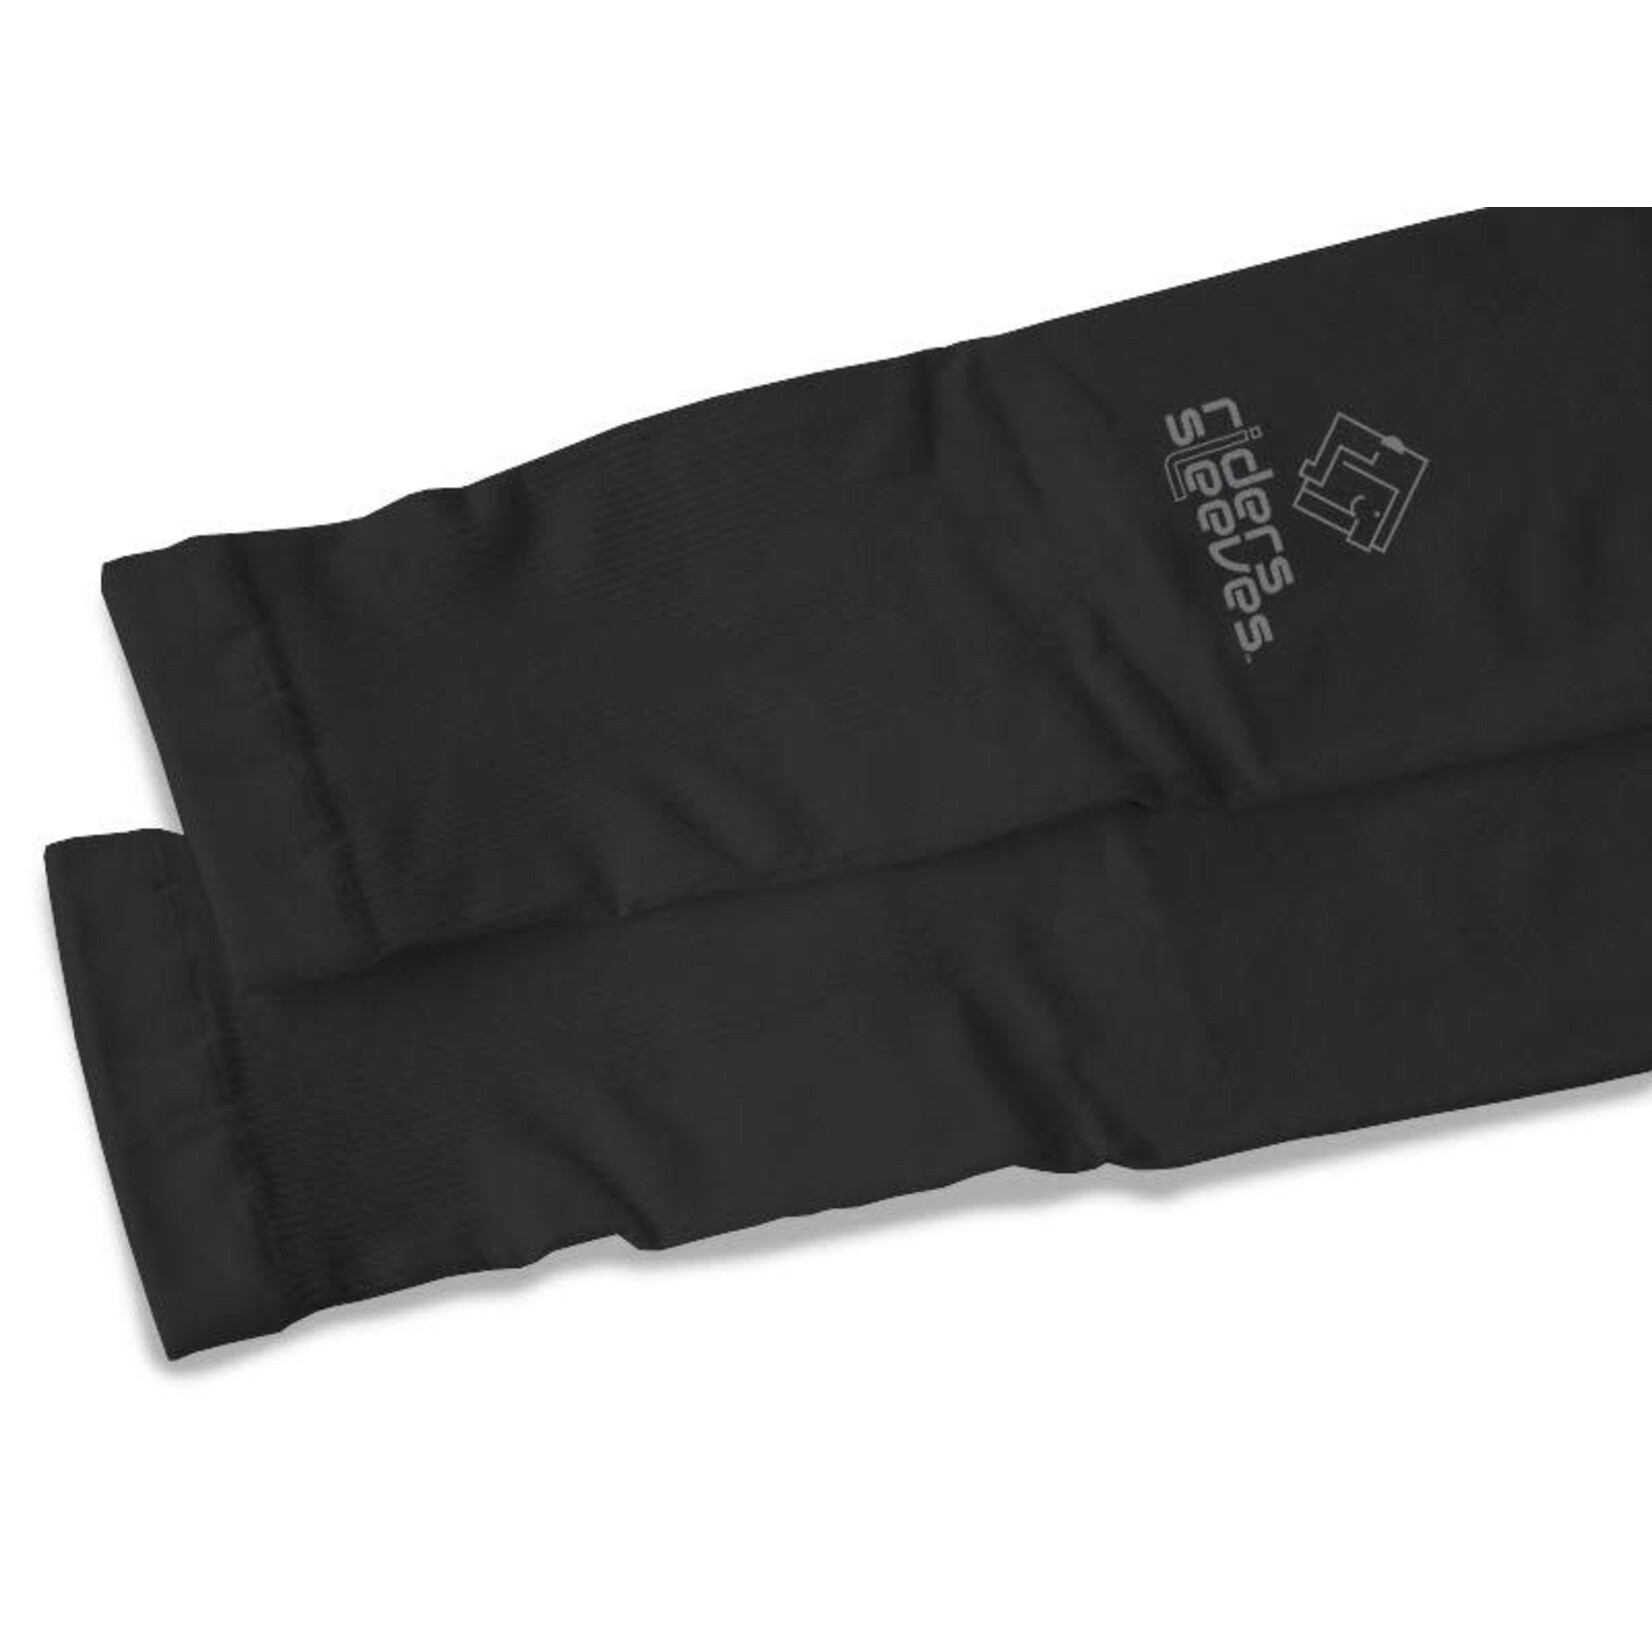 Riders Sleeves Riders Sleeves Cooling Arm Sleeves with UV Protection